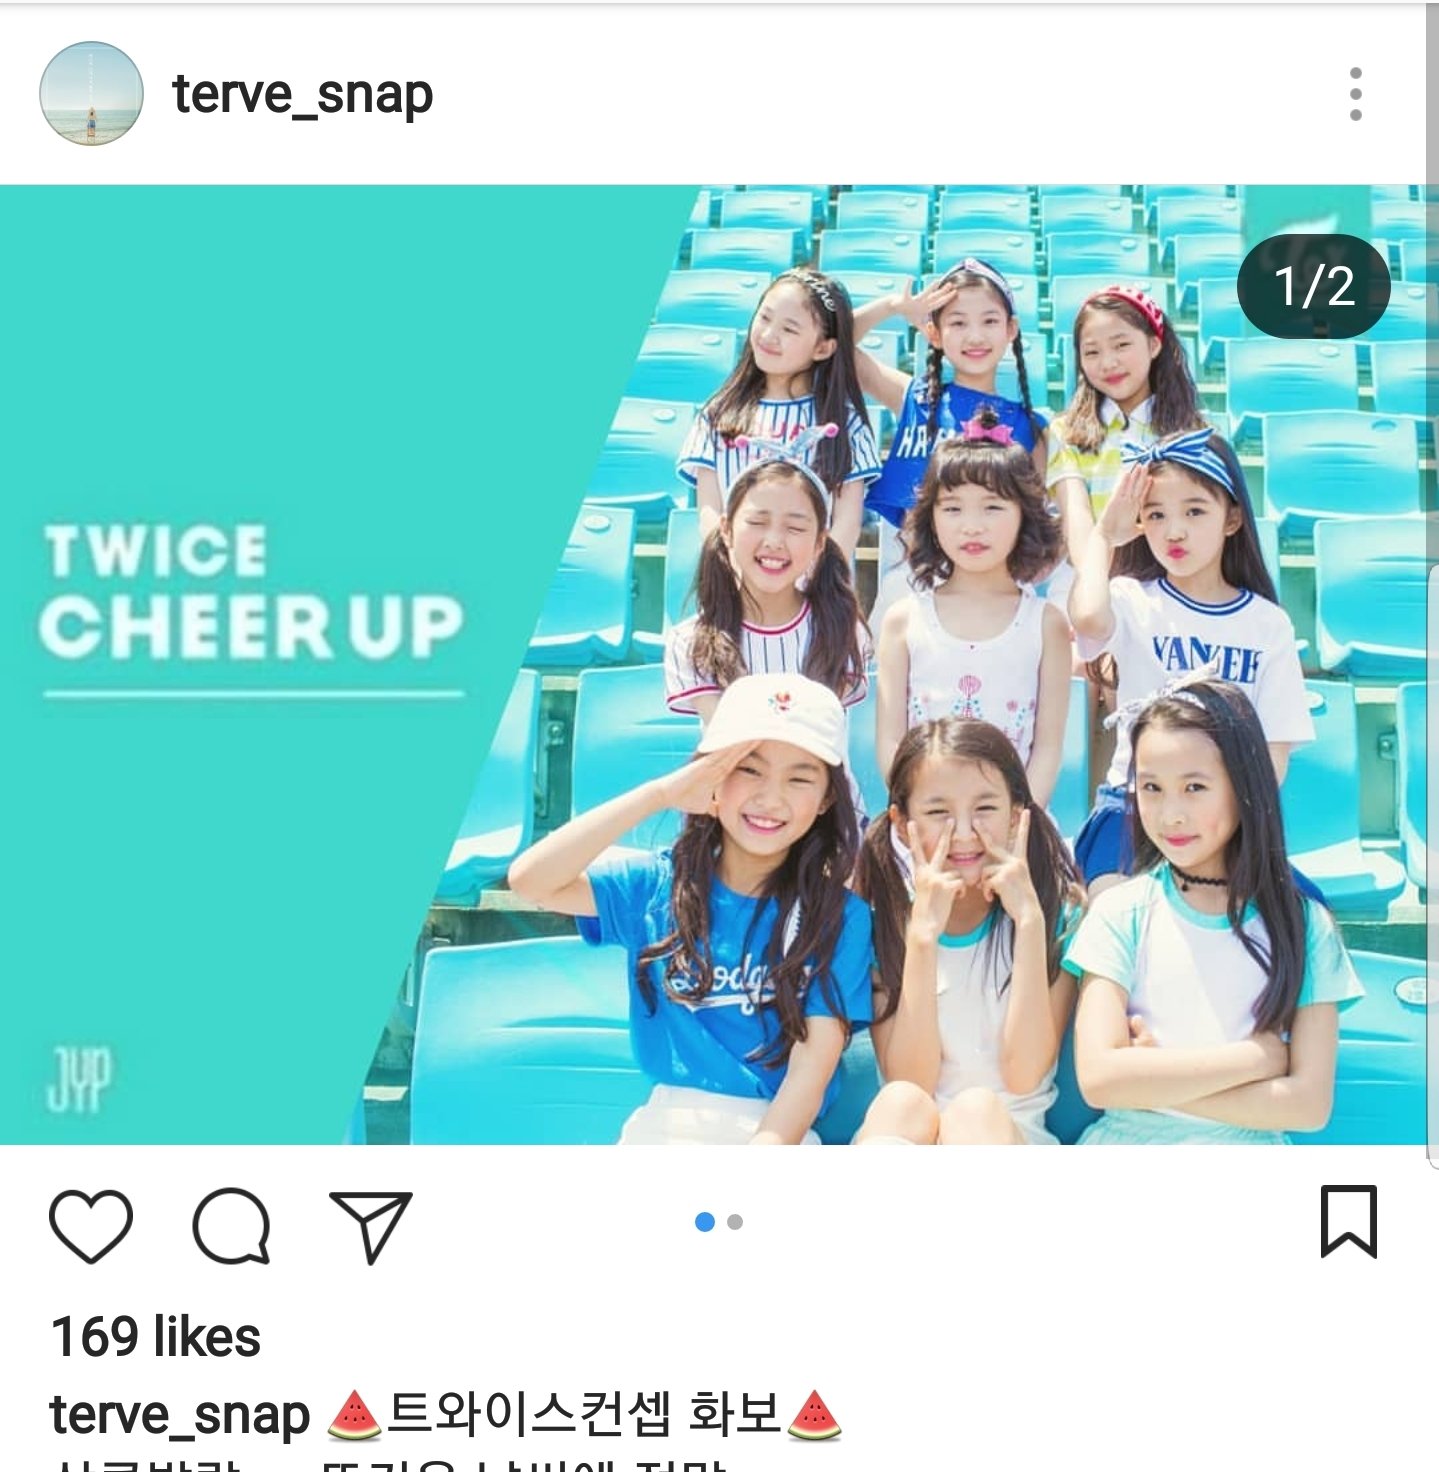 Sk I Found This Really Cute This Photographer Does Kids Photoshoot And They Have The Twice Cheer Up Concept They Replicated The Album Cover And Teaser Twice 트와이스